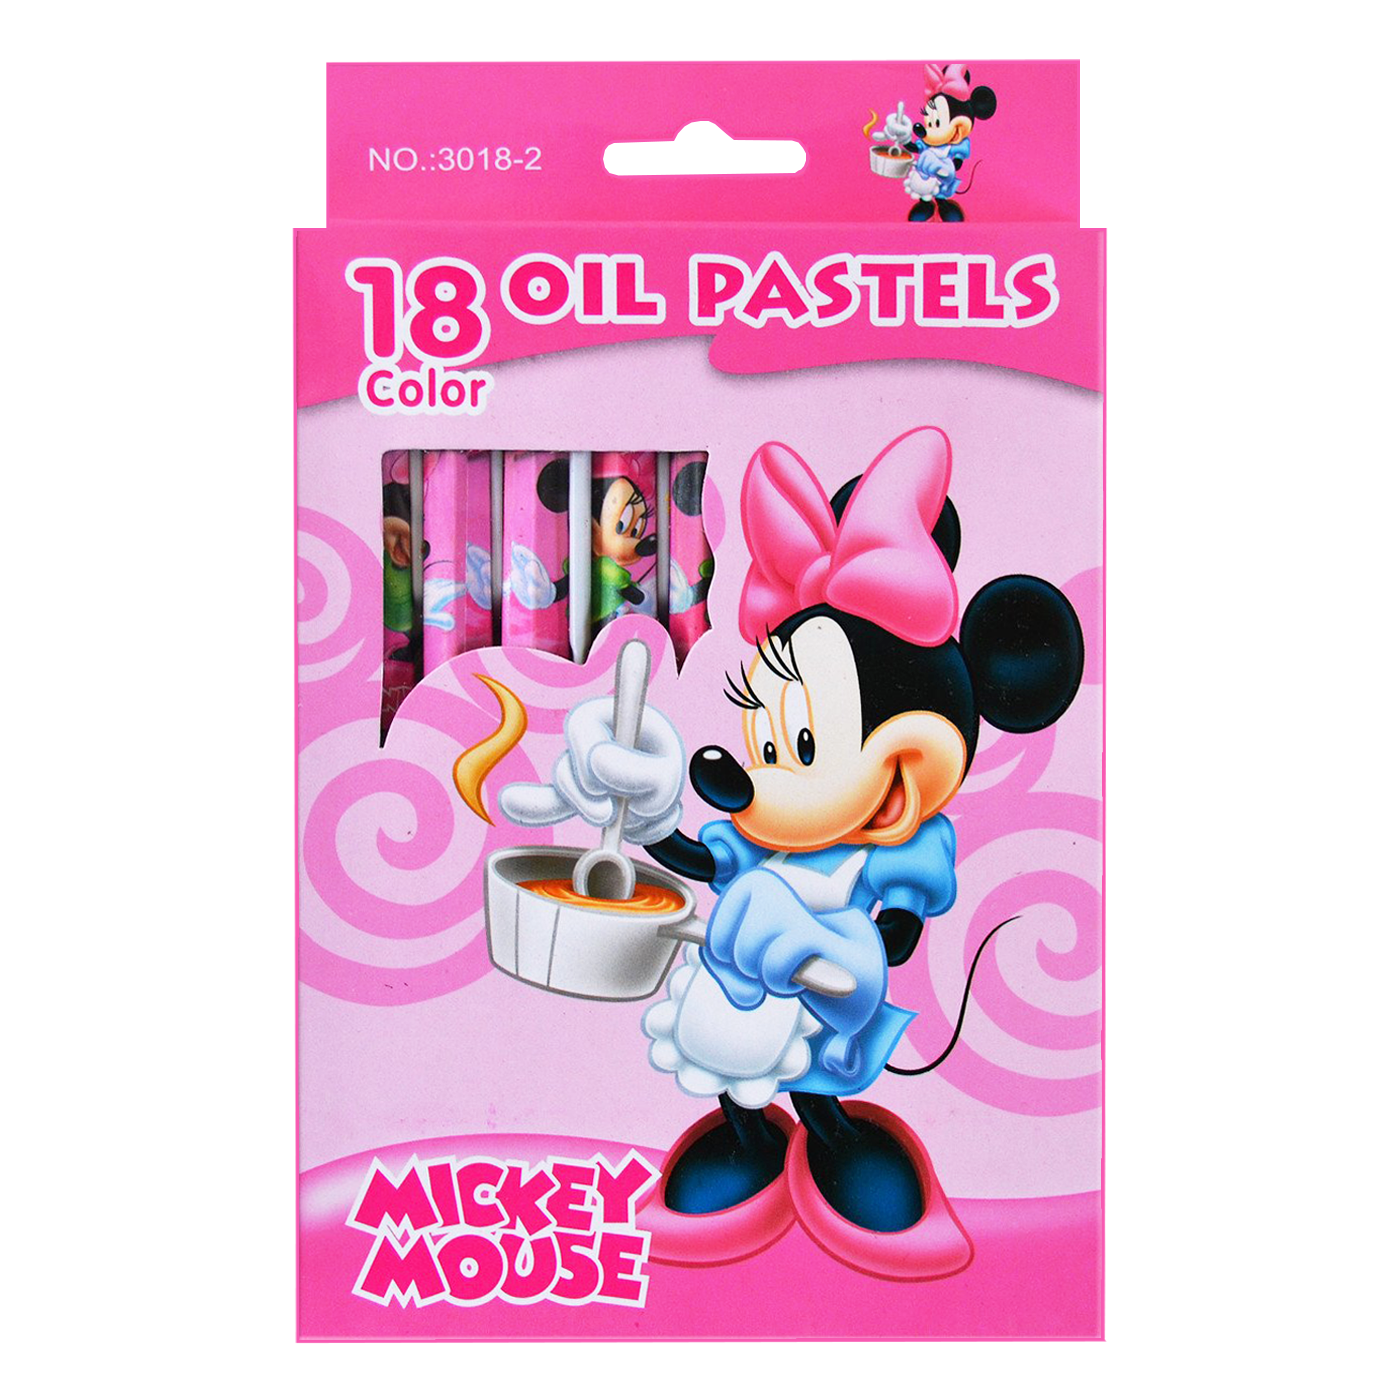 Minnie Mouse Oil Pastels 18 Shades